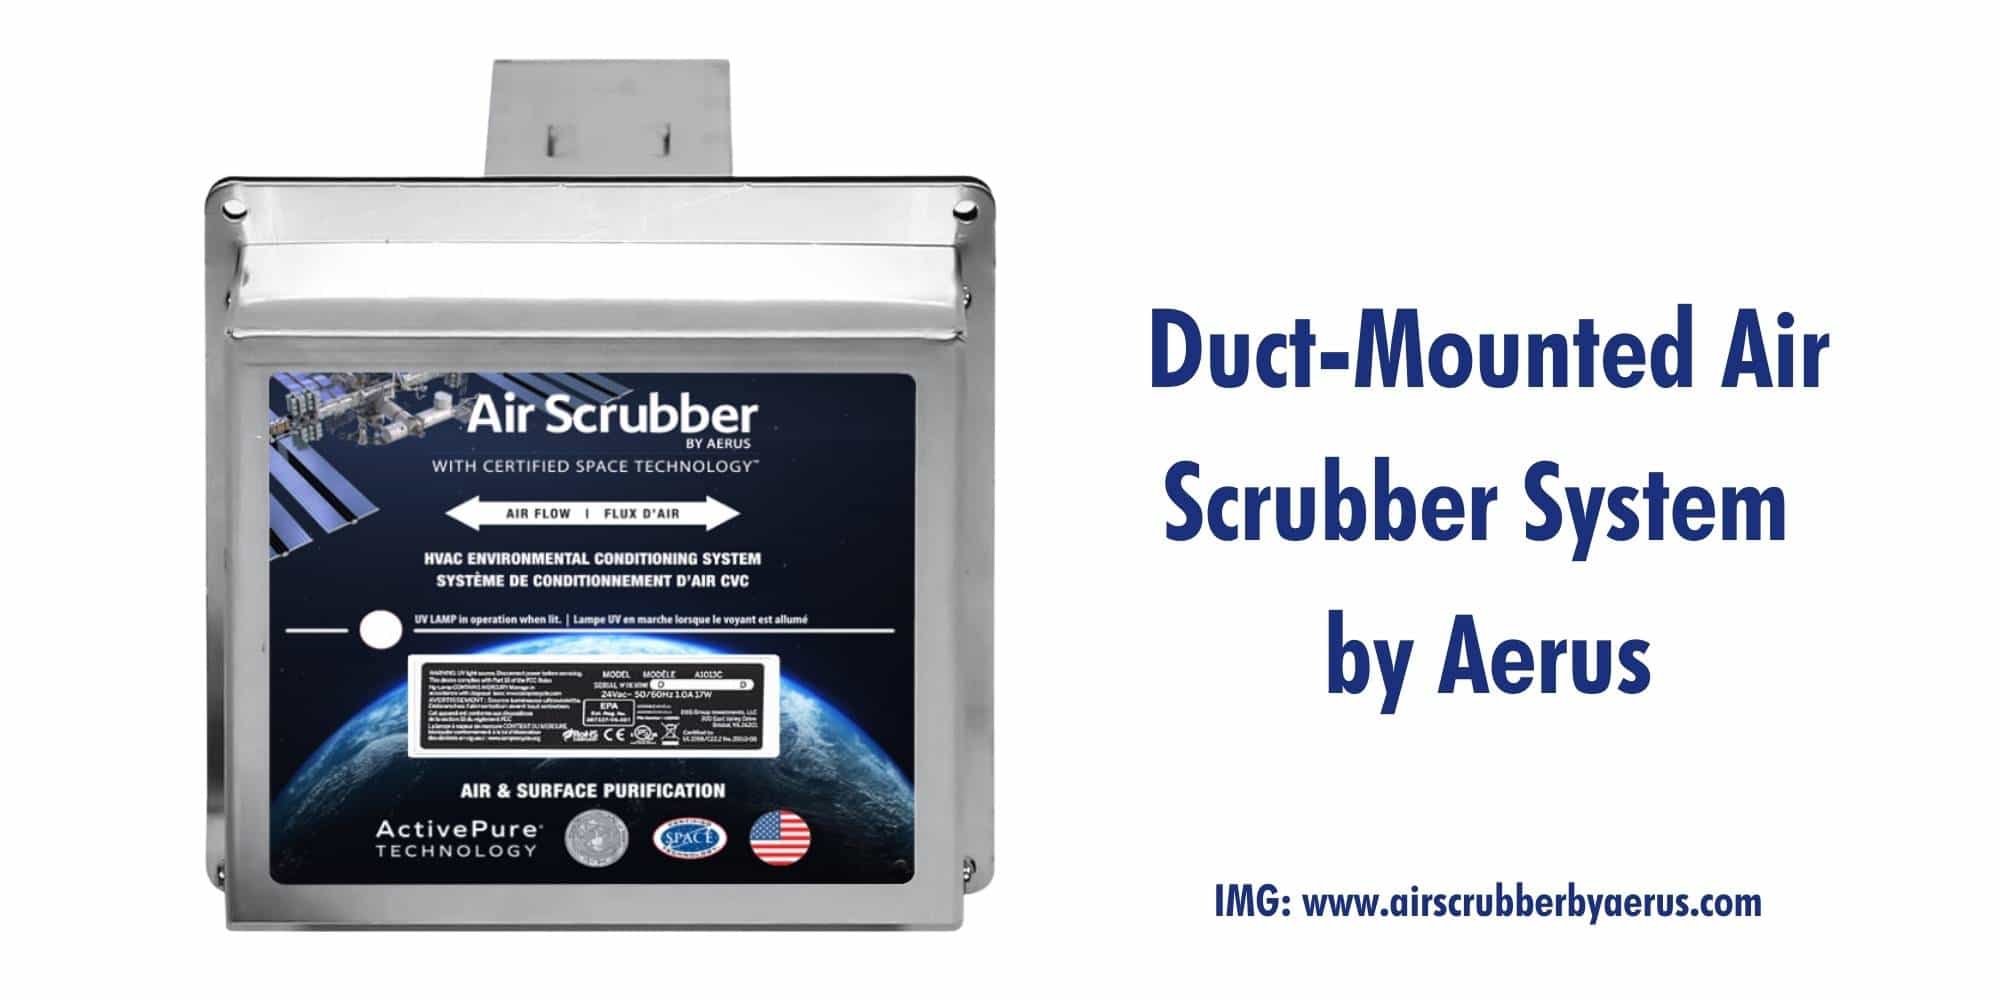 Duct-Mounted Air Scrubber System by Aerus